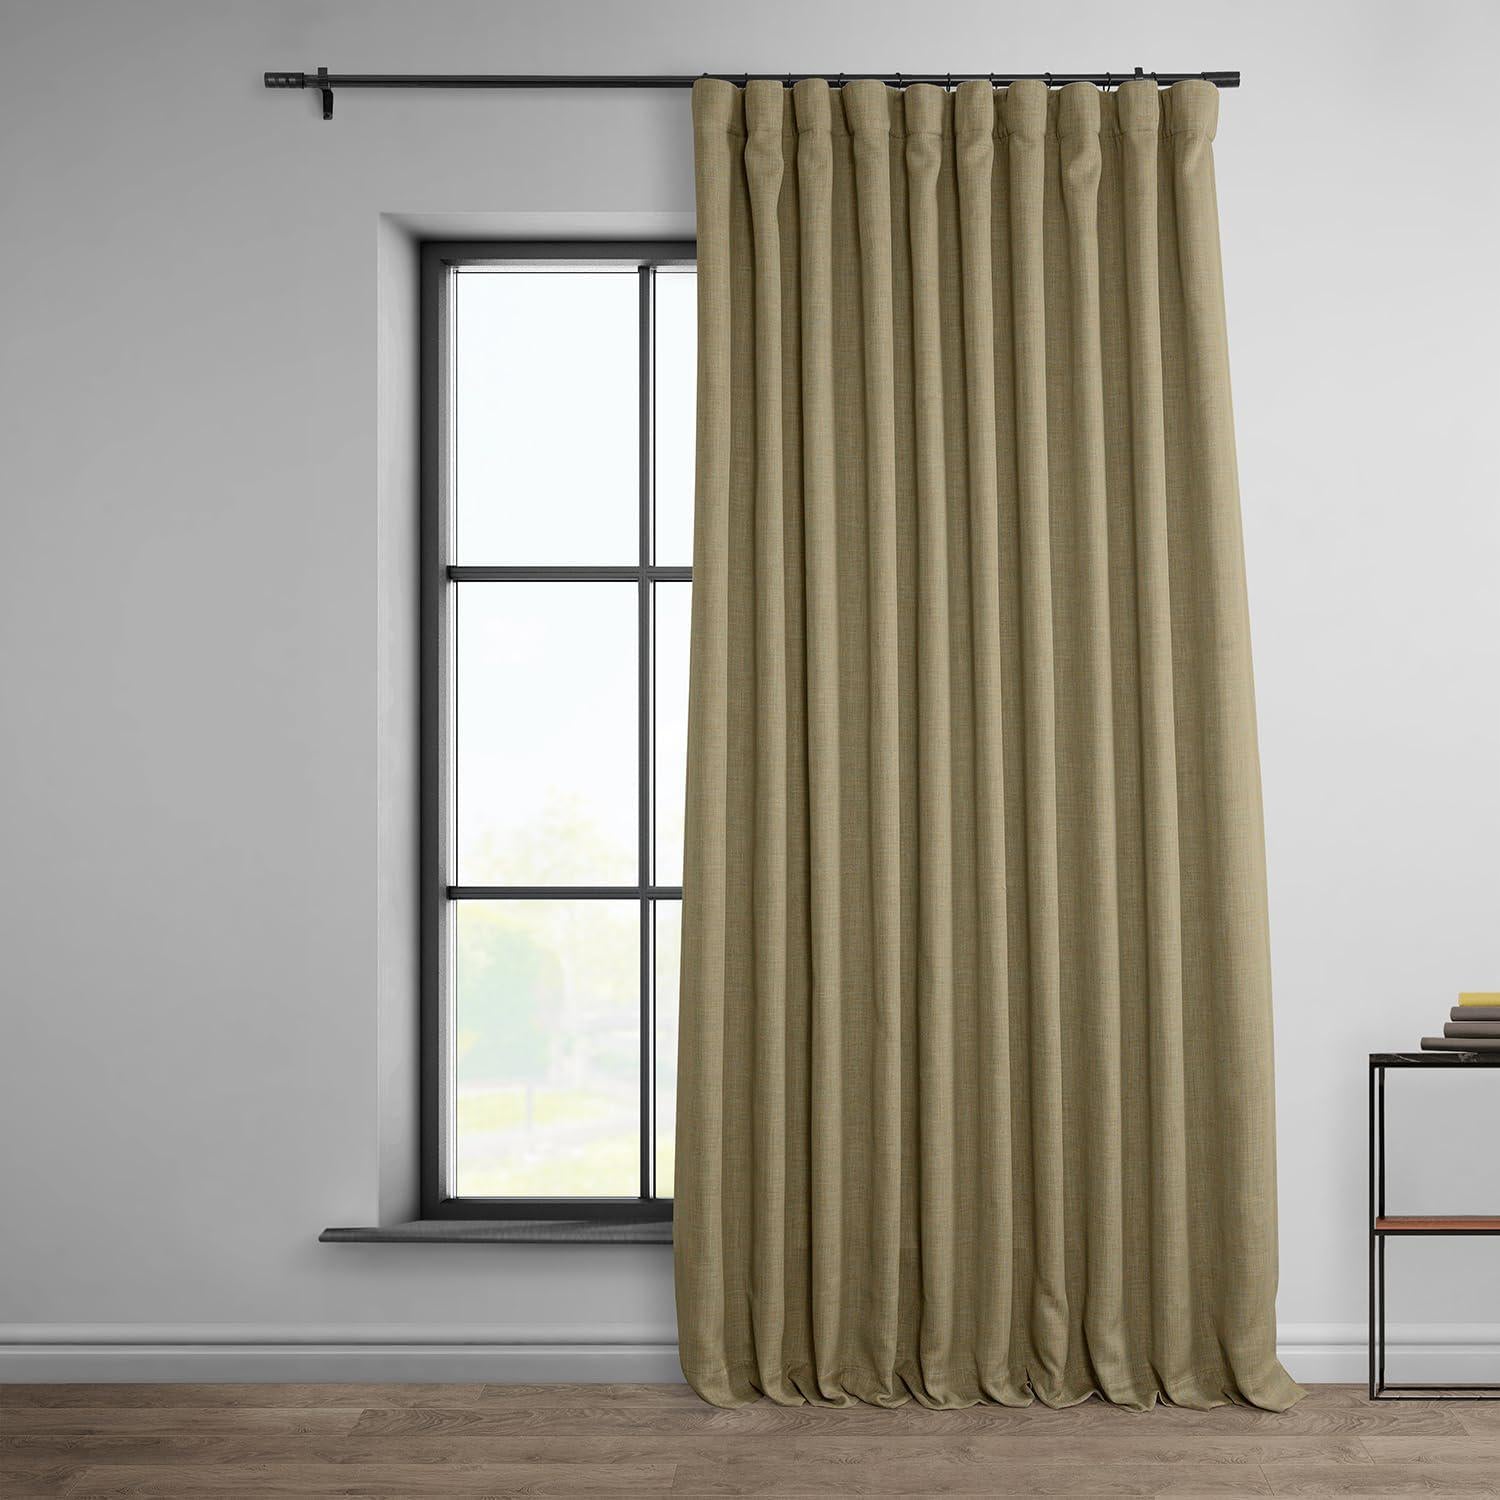 HPD Half Price Drapes Faux Linen Room Darkening Curtains - 120 Inches Long Extra Wide Luxury Linen Curtains for Bedroom and Living Room (1 Panel), 100W X 120L, Nomad Tan